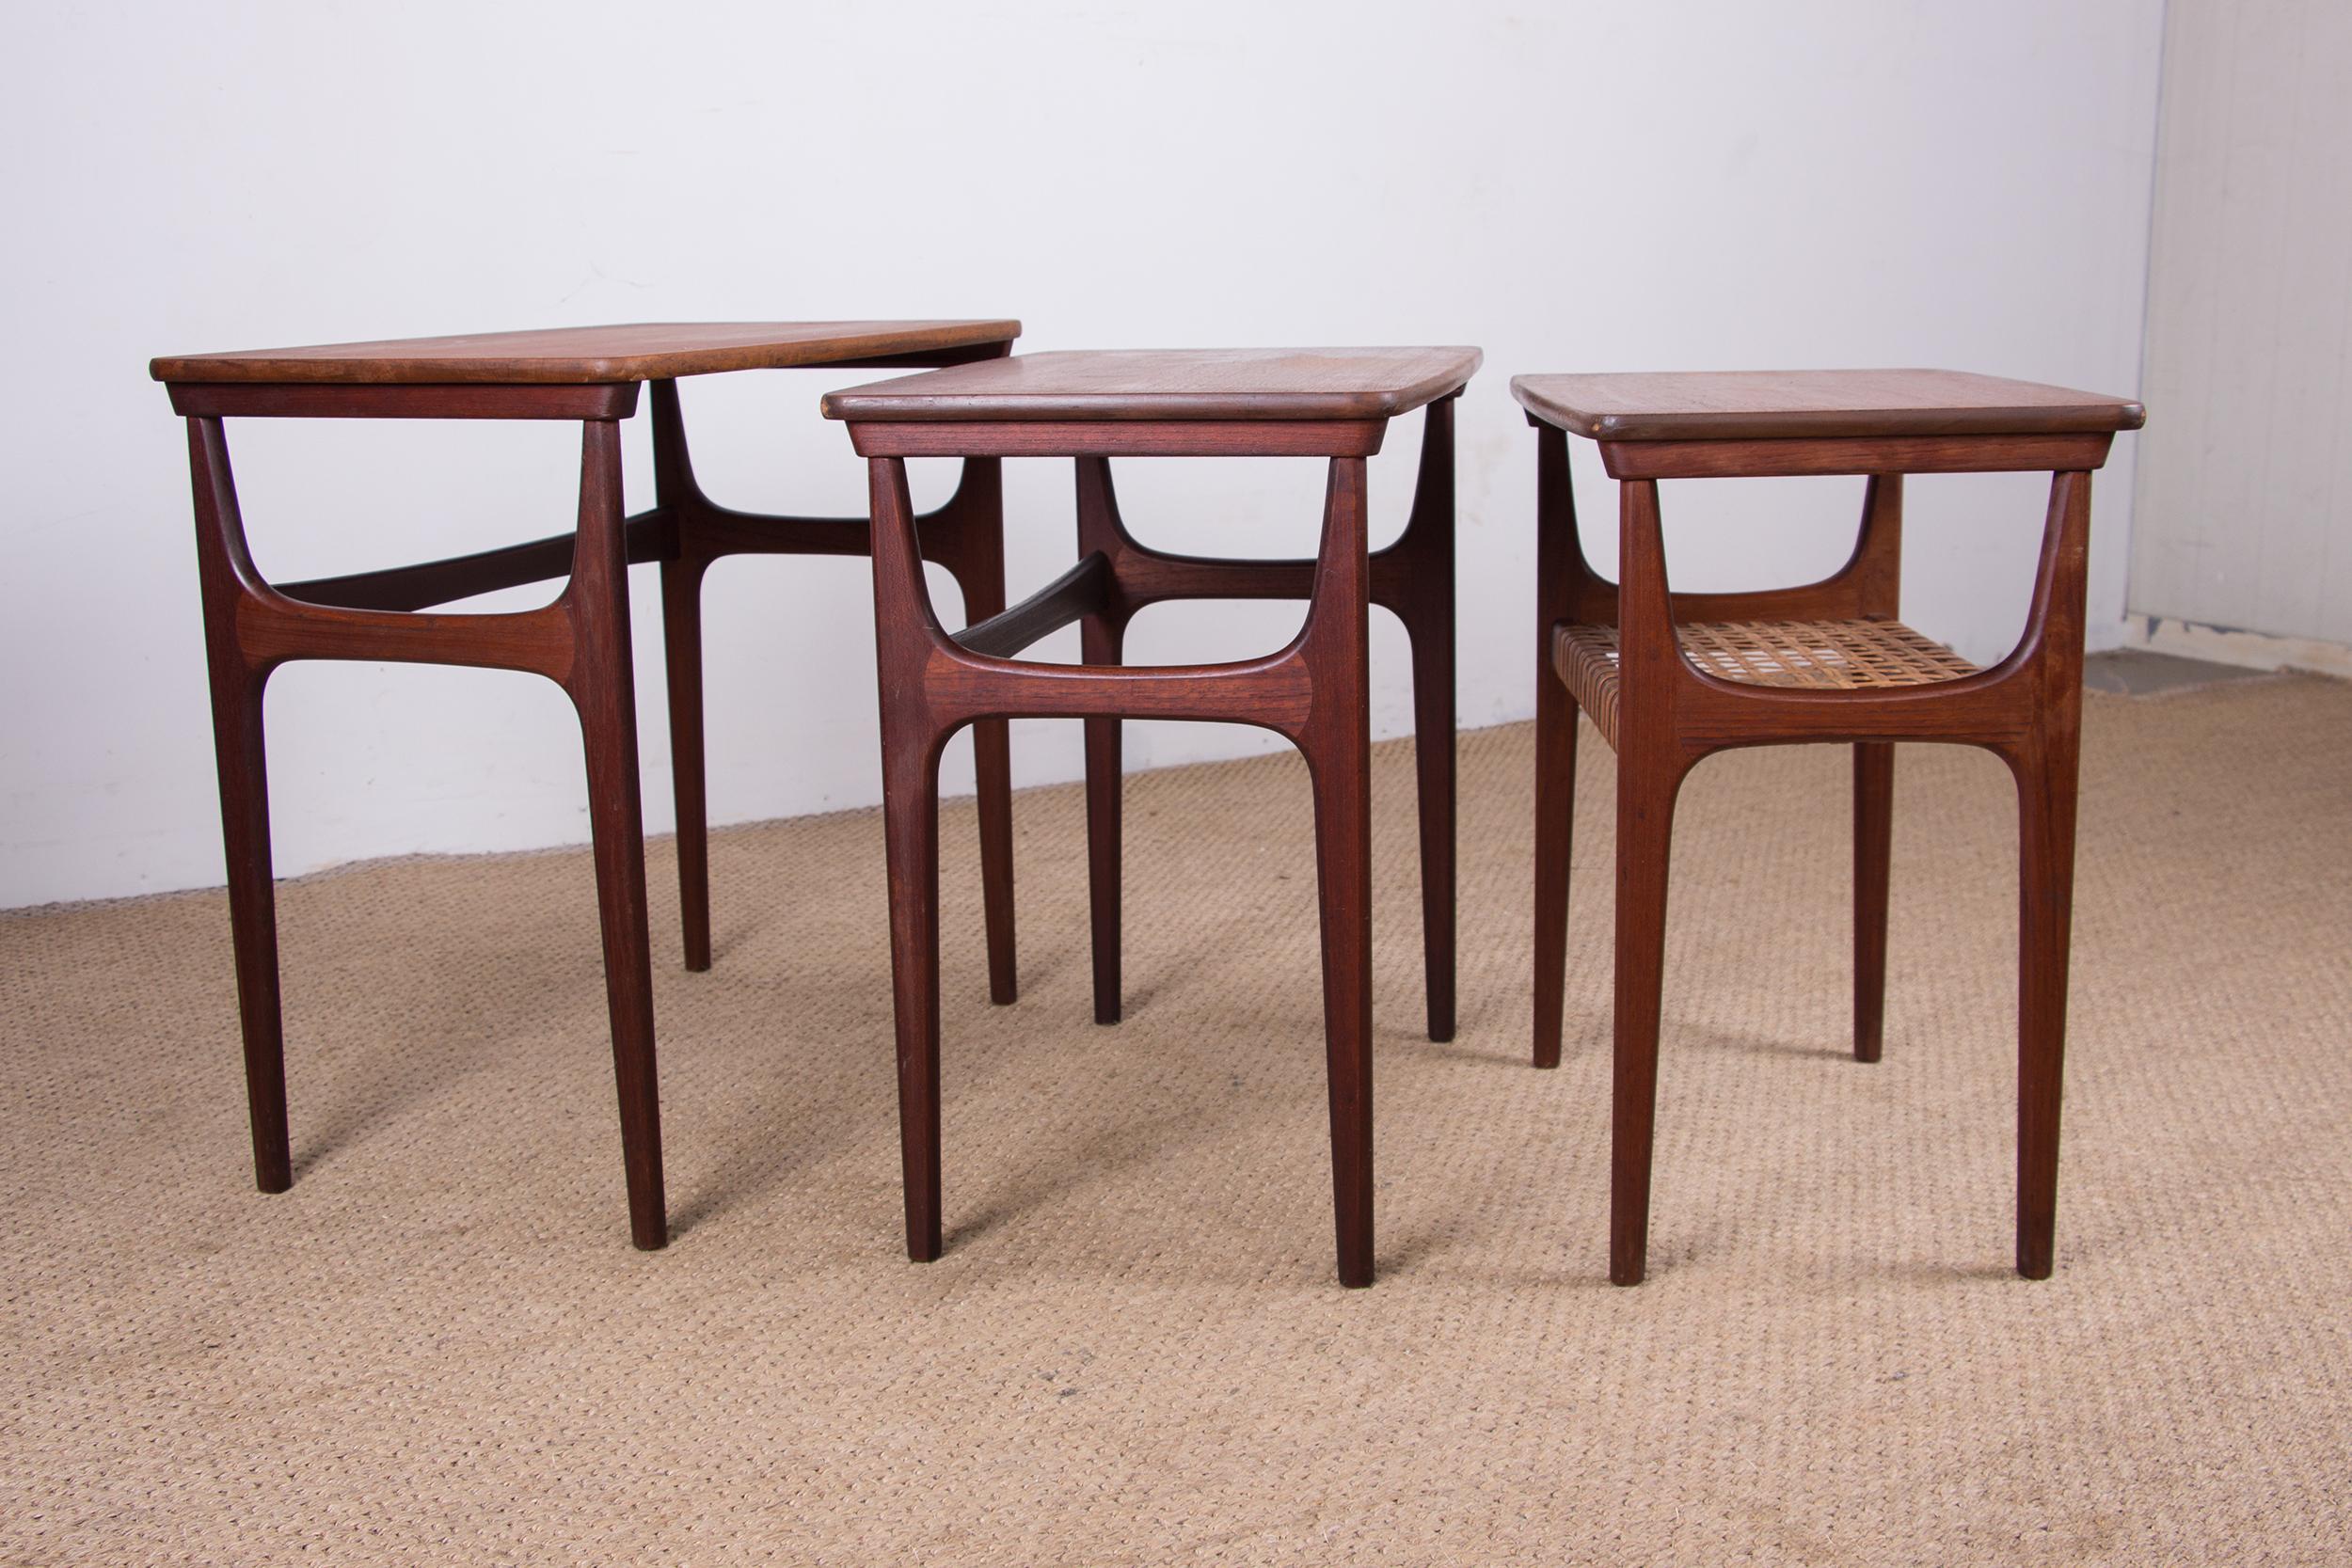 Three Danish Teak and Caning Nesting Tables by Erling Torvits for Heltborg For Sale 4